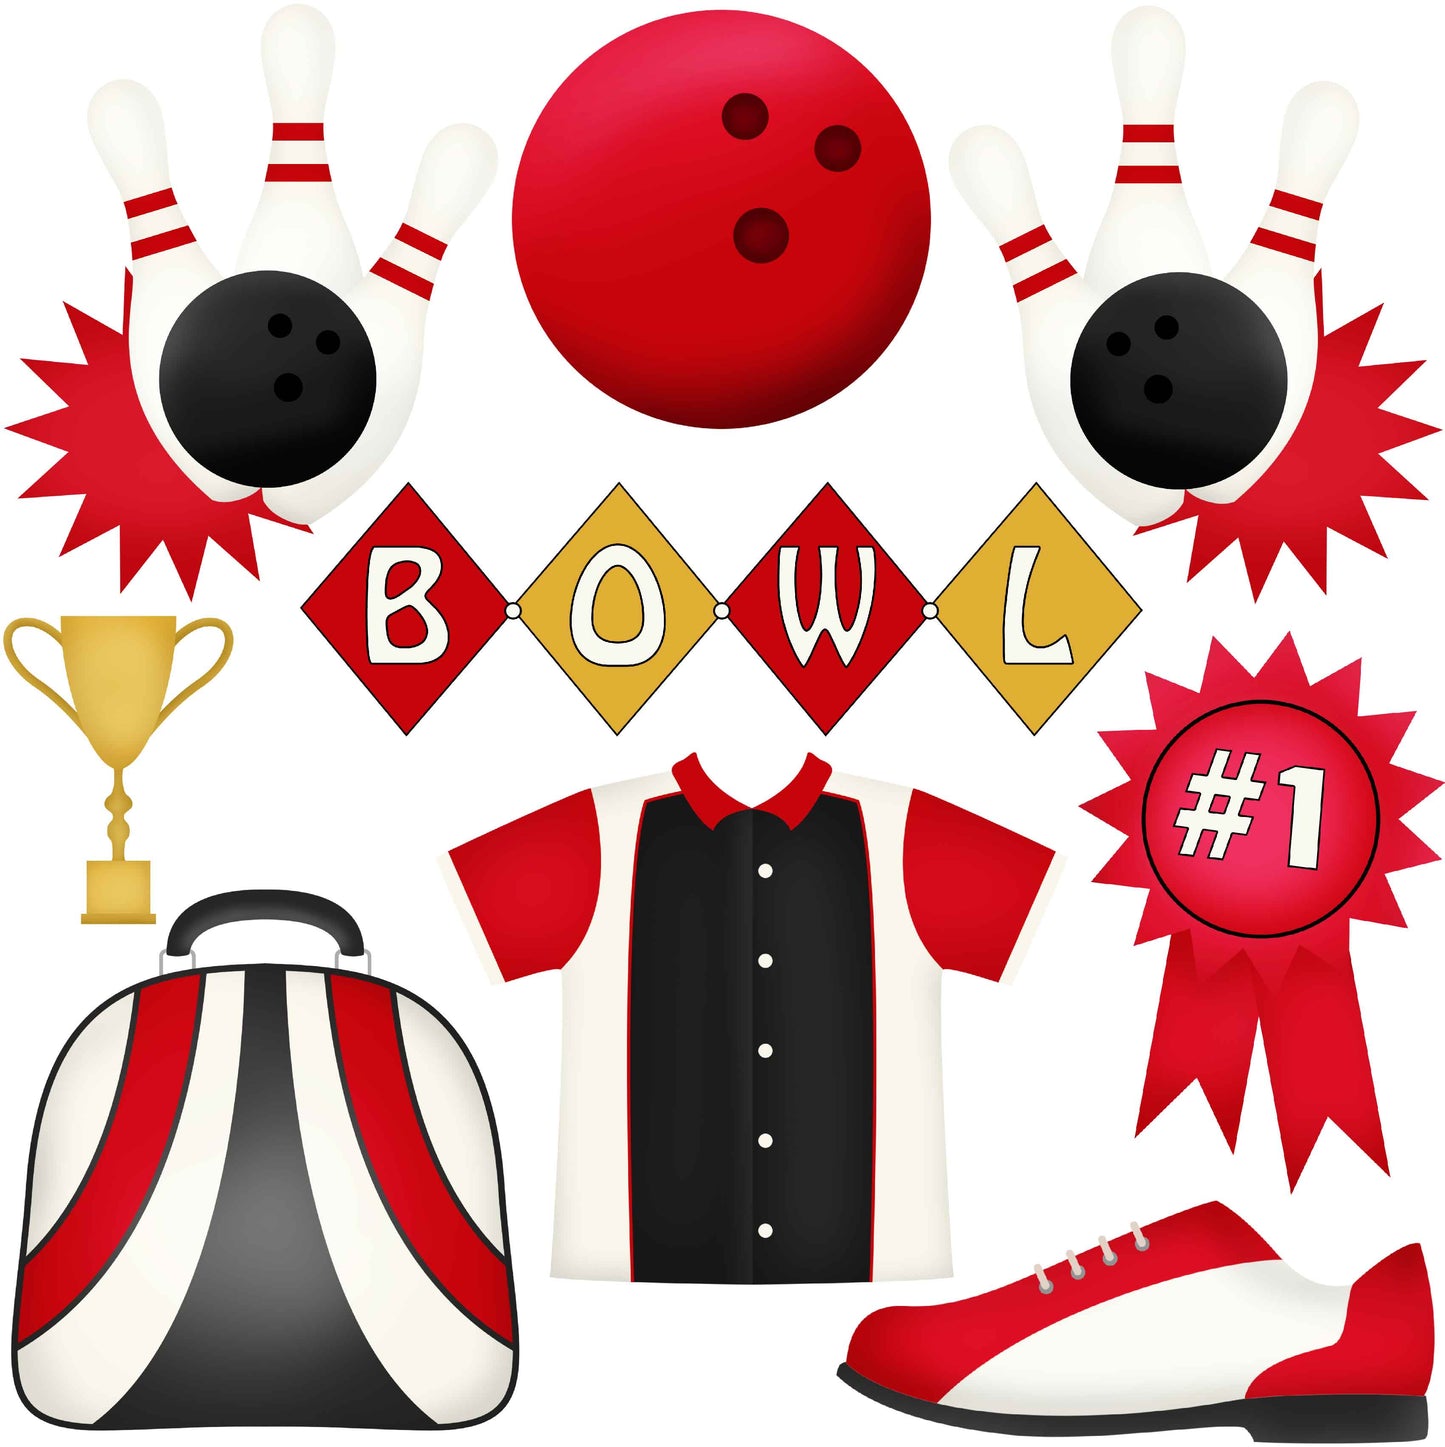 Bowling Set 3 Half Sheet Misc. (Must Purchase 2 Half sheets - You Can Mix & Match)